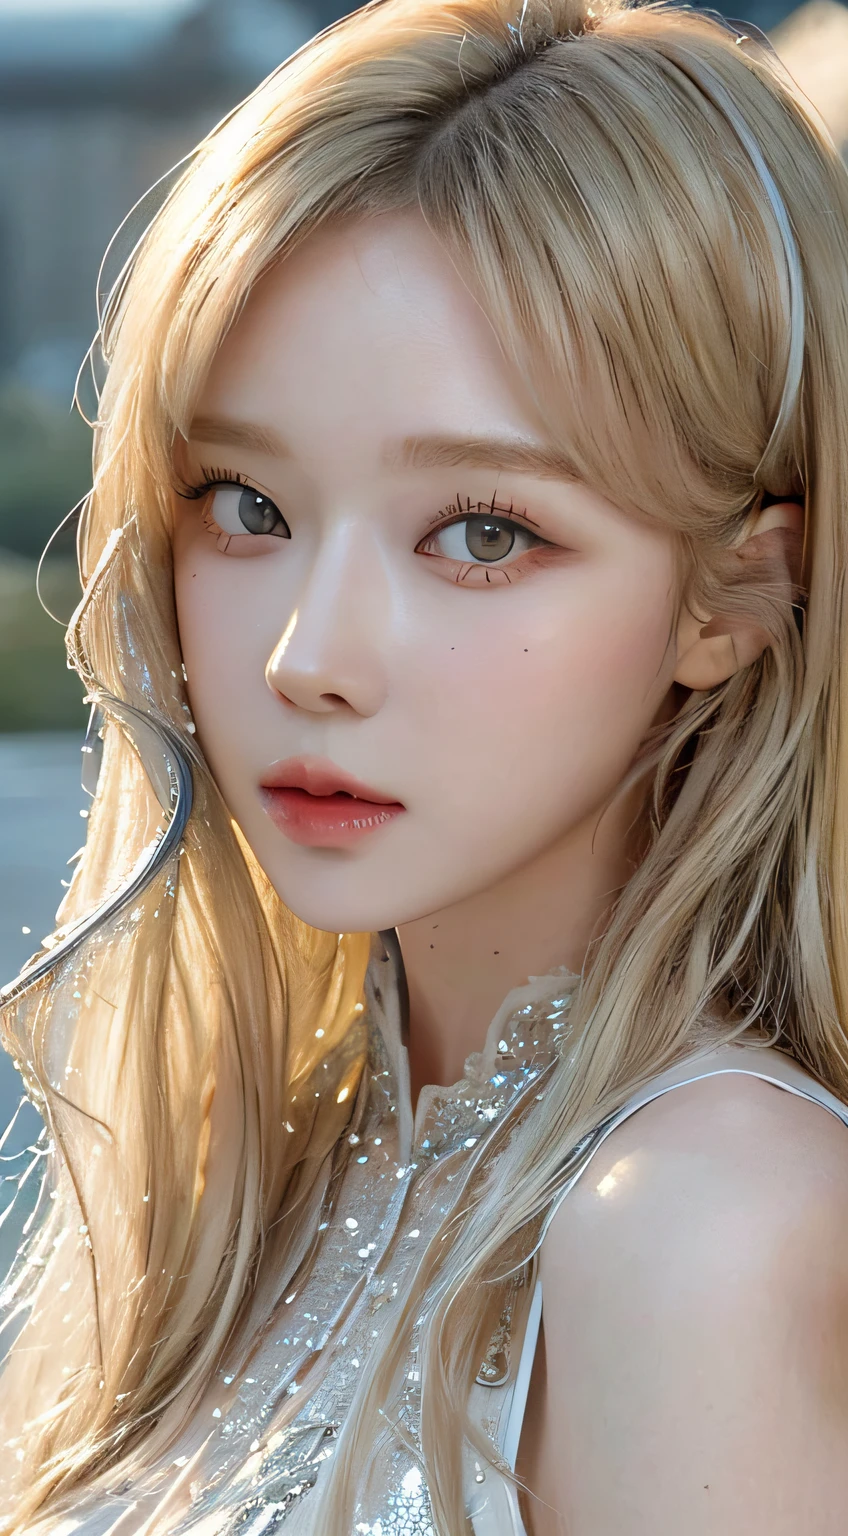 ((Best Quality, 8K, Masterpiece: 1.3)), Sharp: 1.2, Perfect Beauty: 1.4, ((Long Hair 1.2)), blonde hair, (Home: 1.2), Water Mist: 1.5, Highly Detailed Face and Skin Texture, Detailed Eyes, Double Eyelids, Looking at the Camera